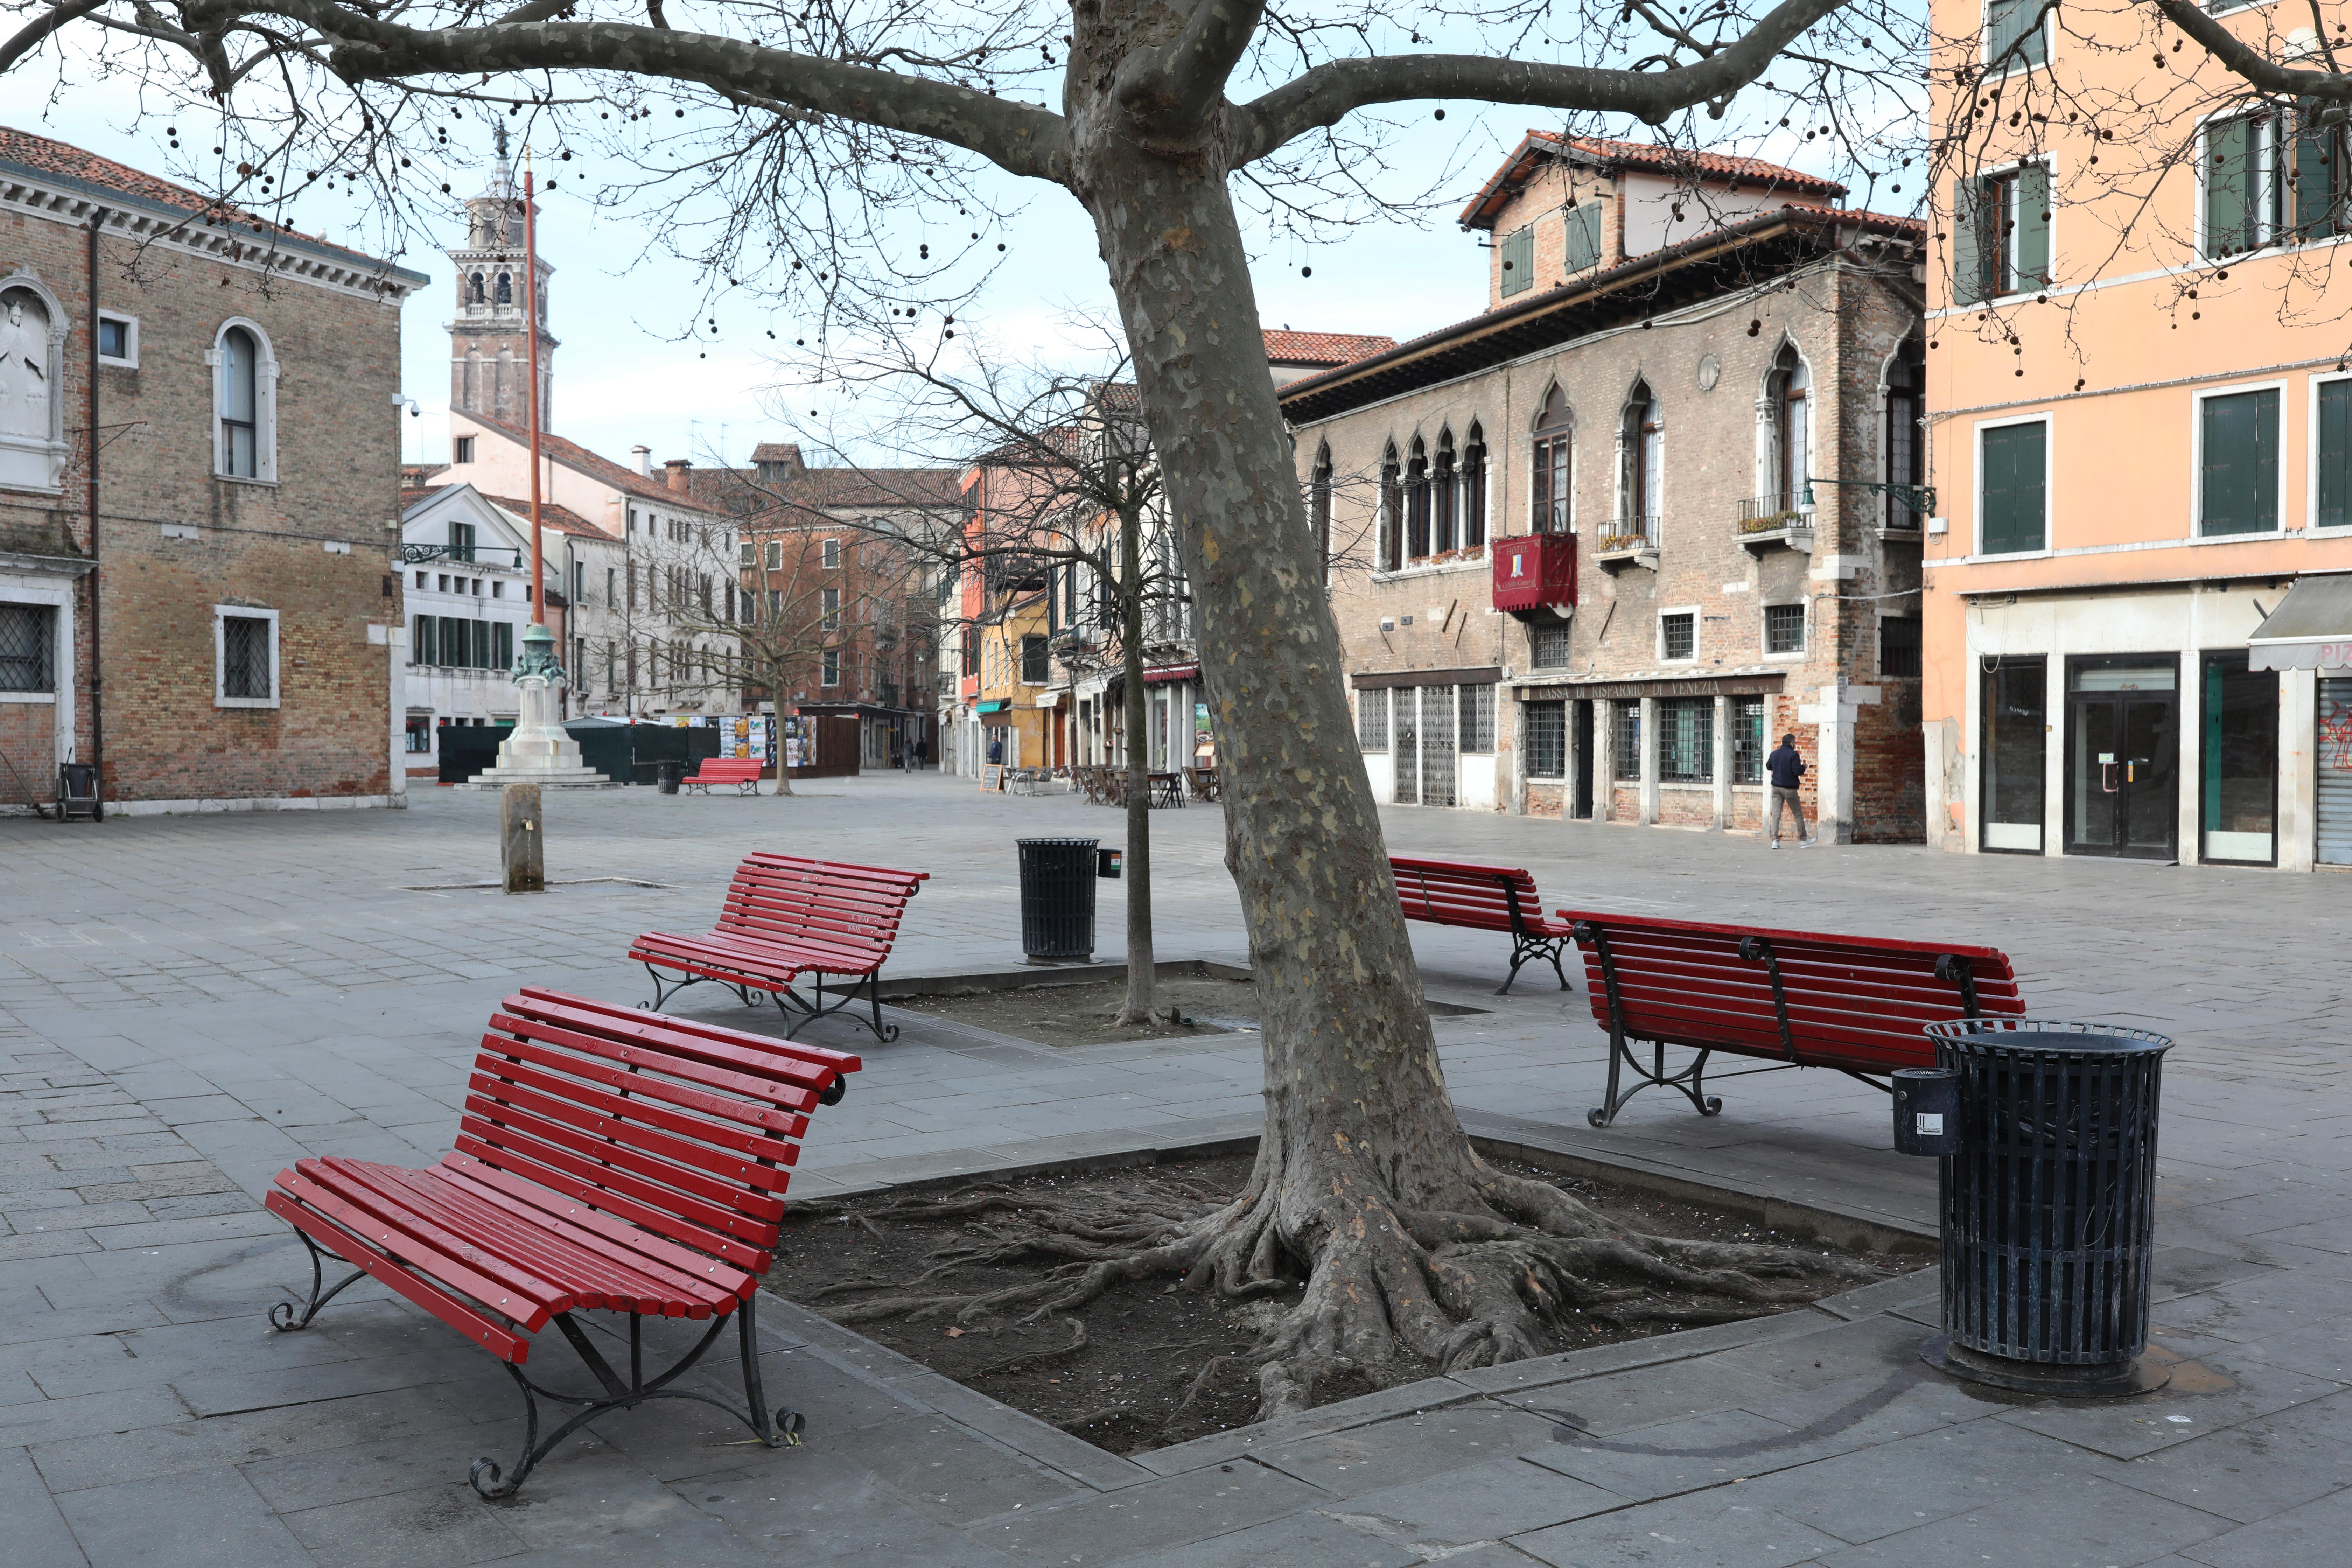 A completely empty public square in Venice.